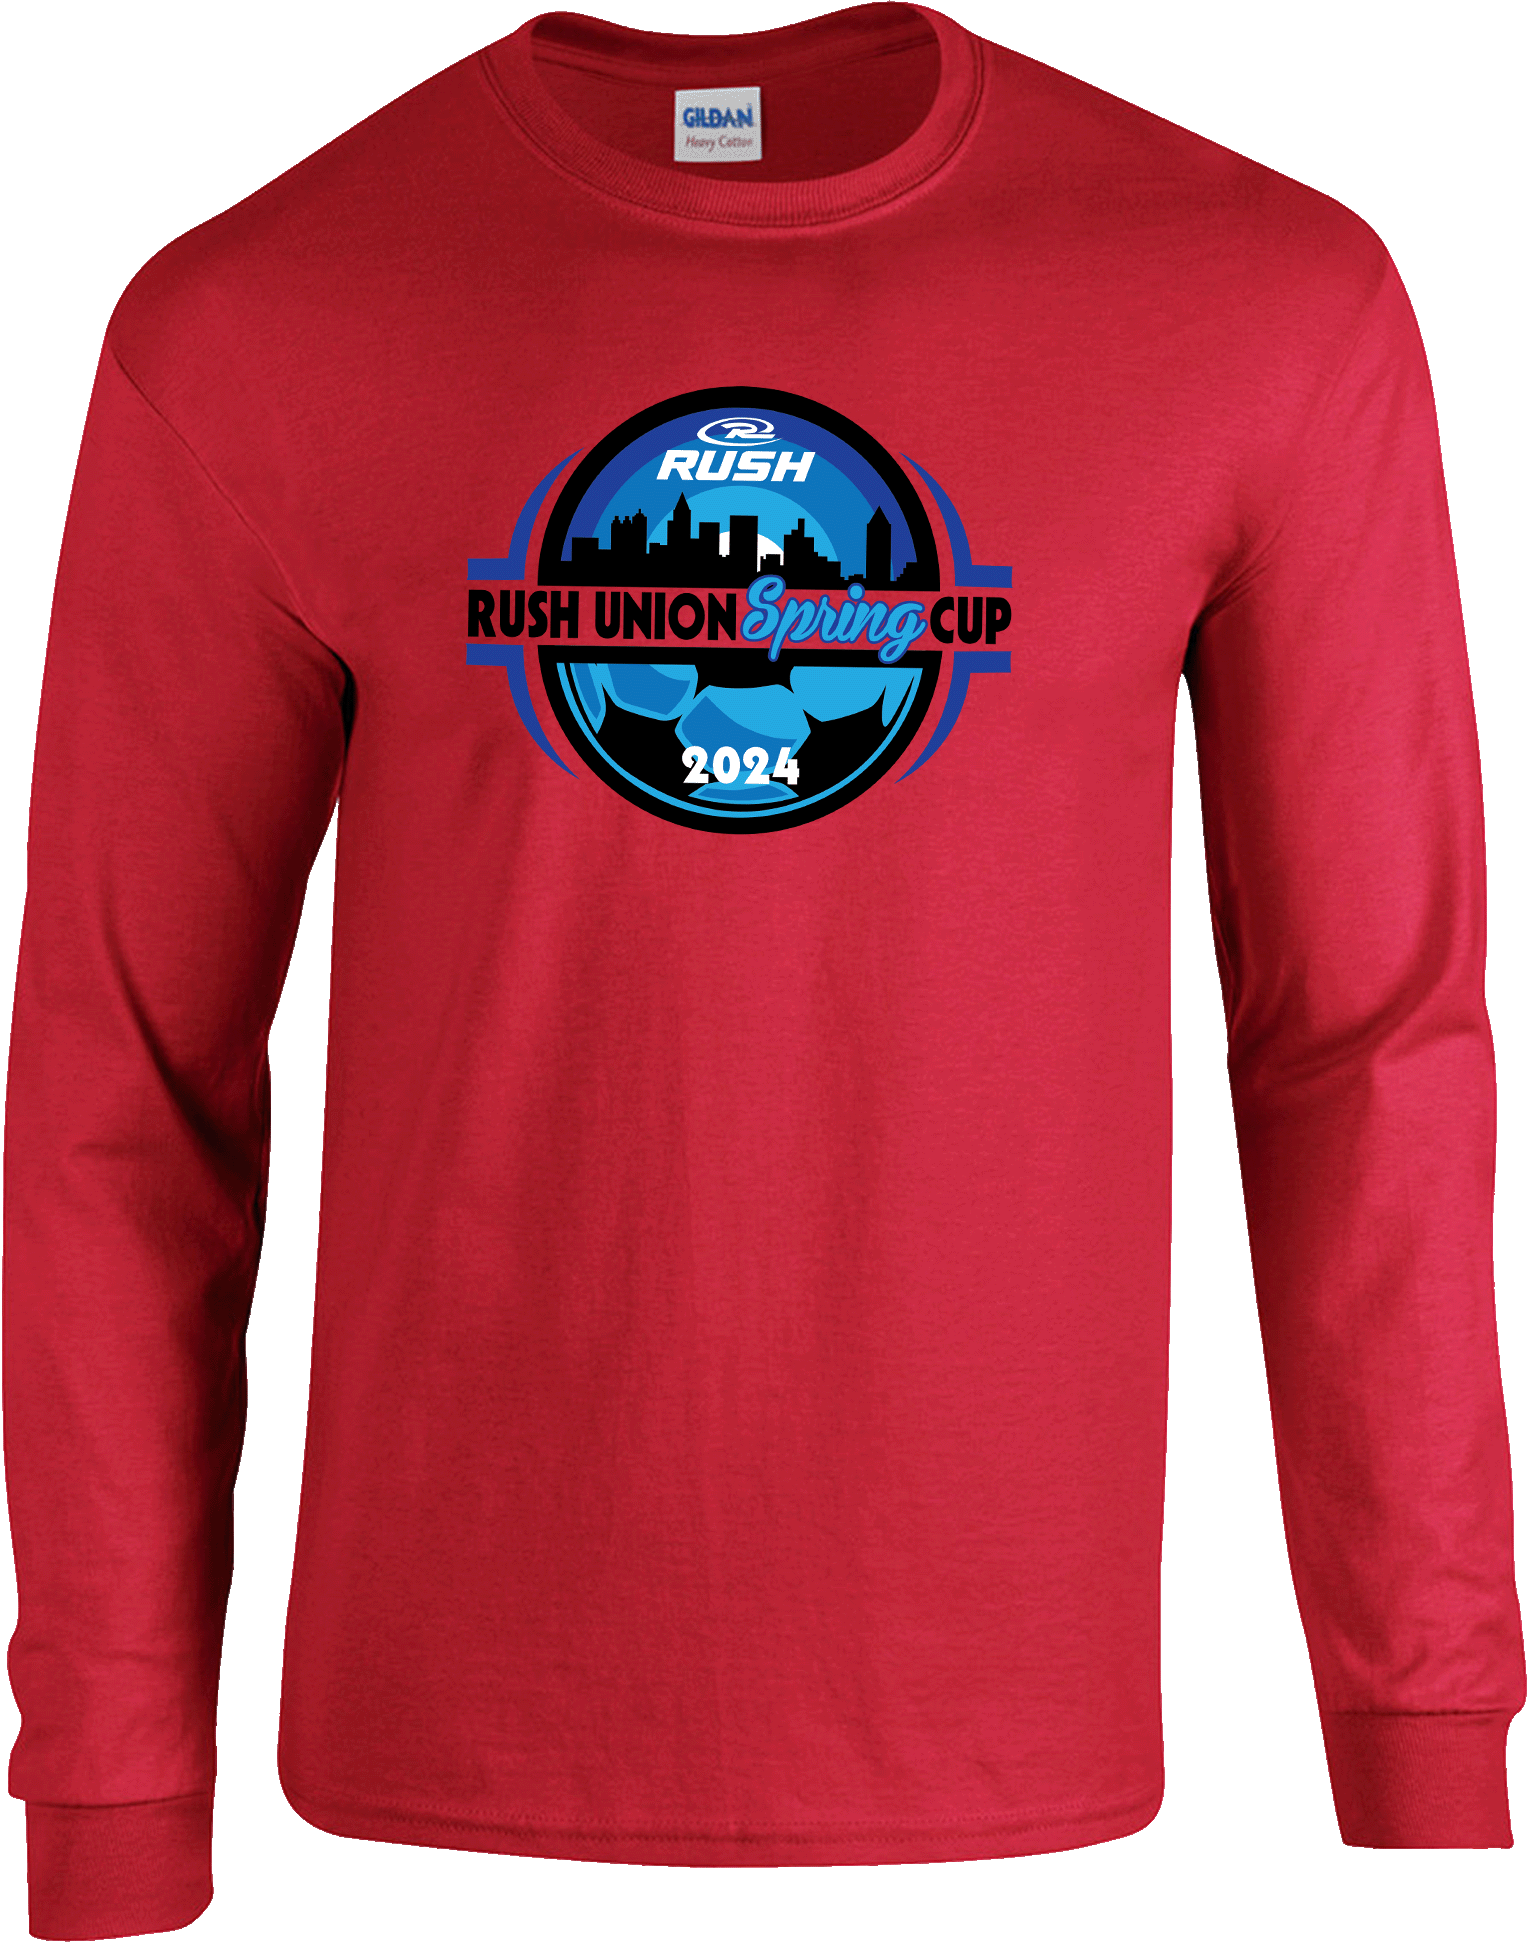 Long Sleeves - 2024 Rush Union Spring Cup